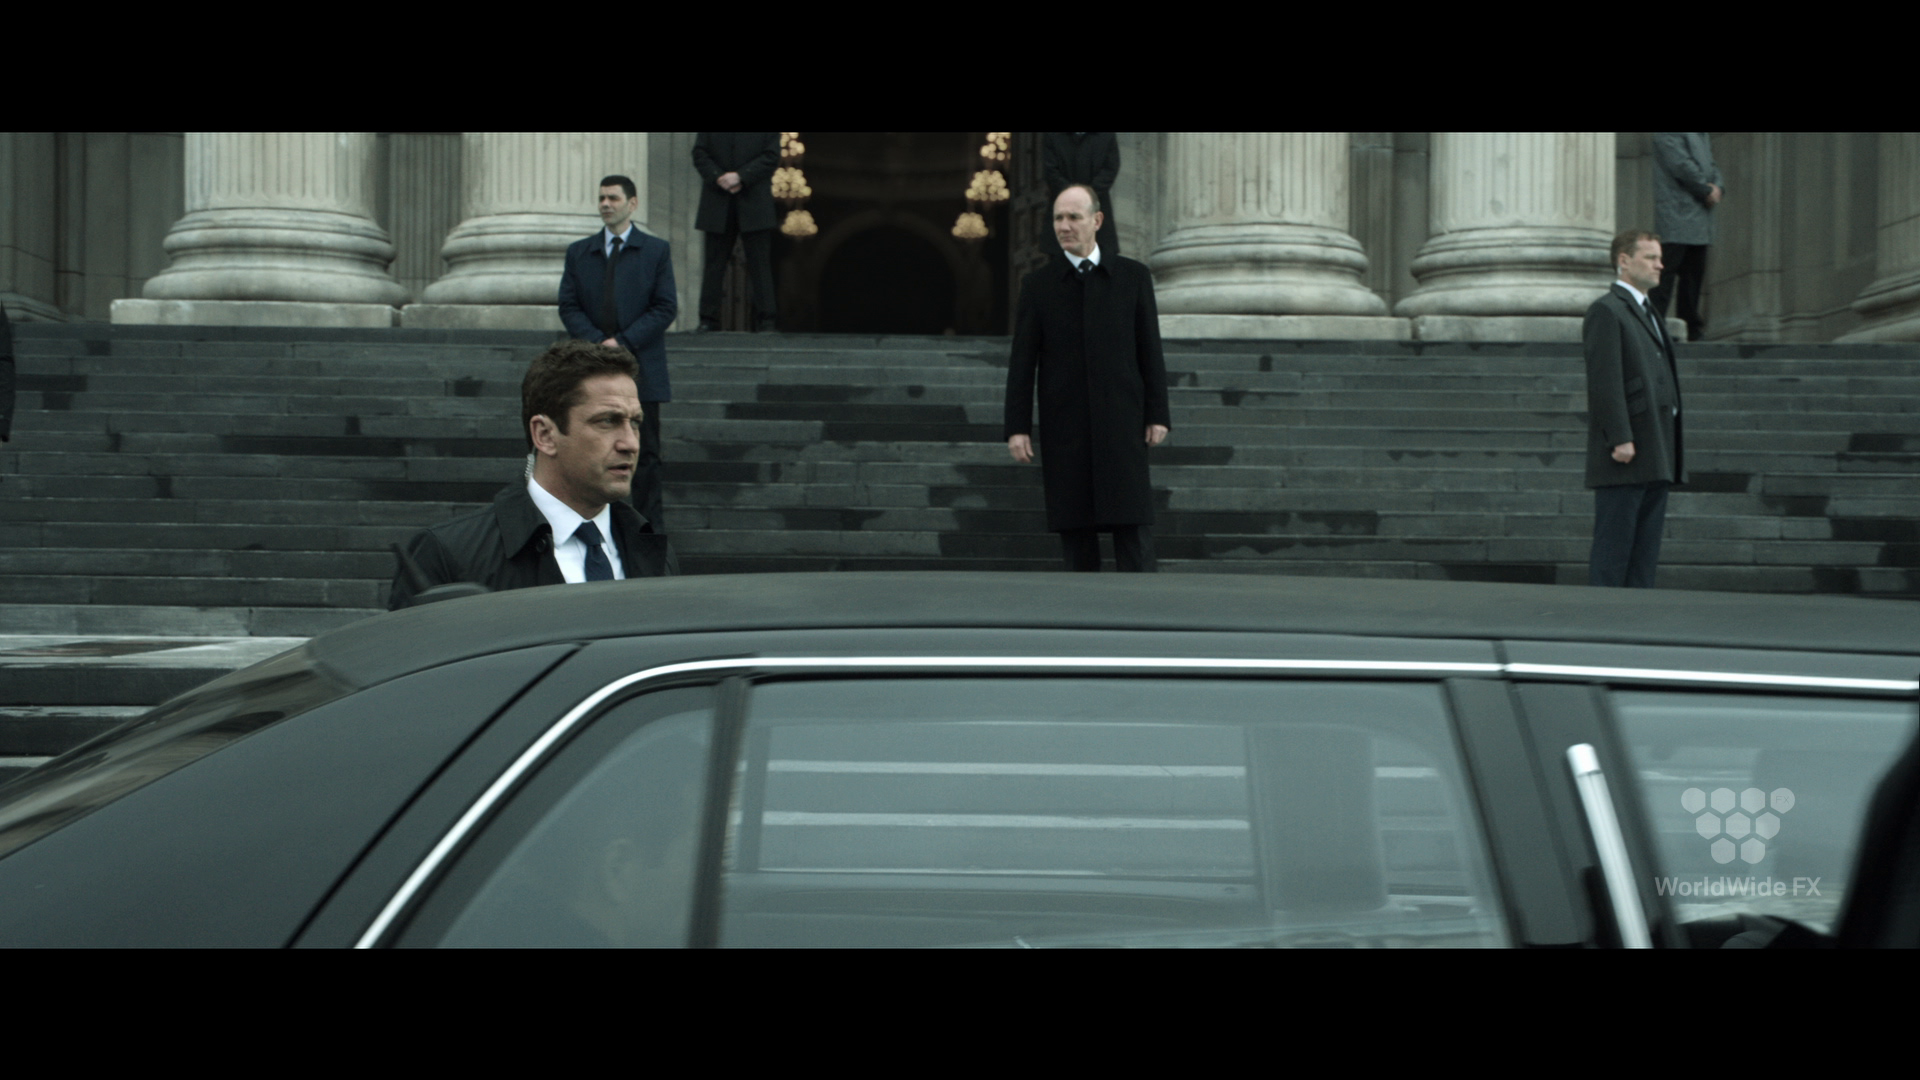 London Has Fallen VFX Breakdown by Worldwide FX – Saint Paul’s Cathedral Sequence